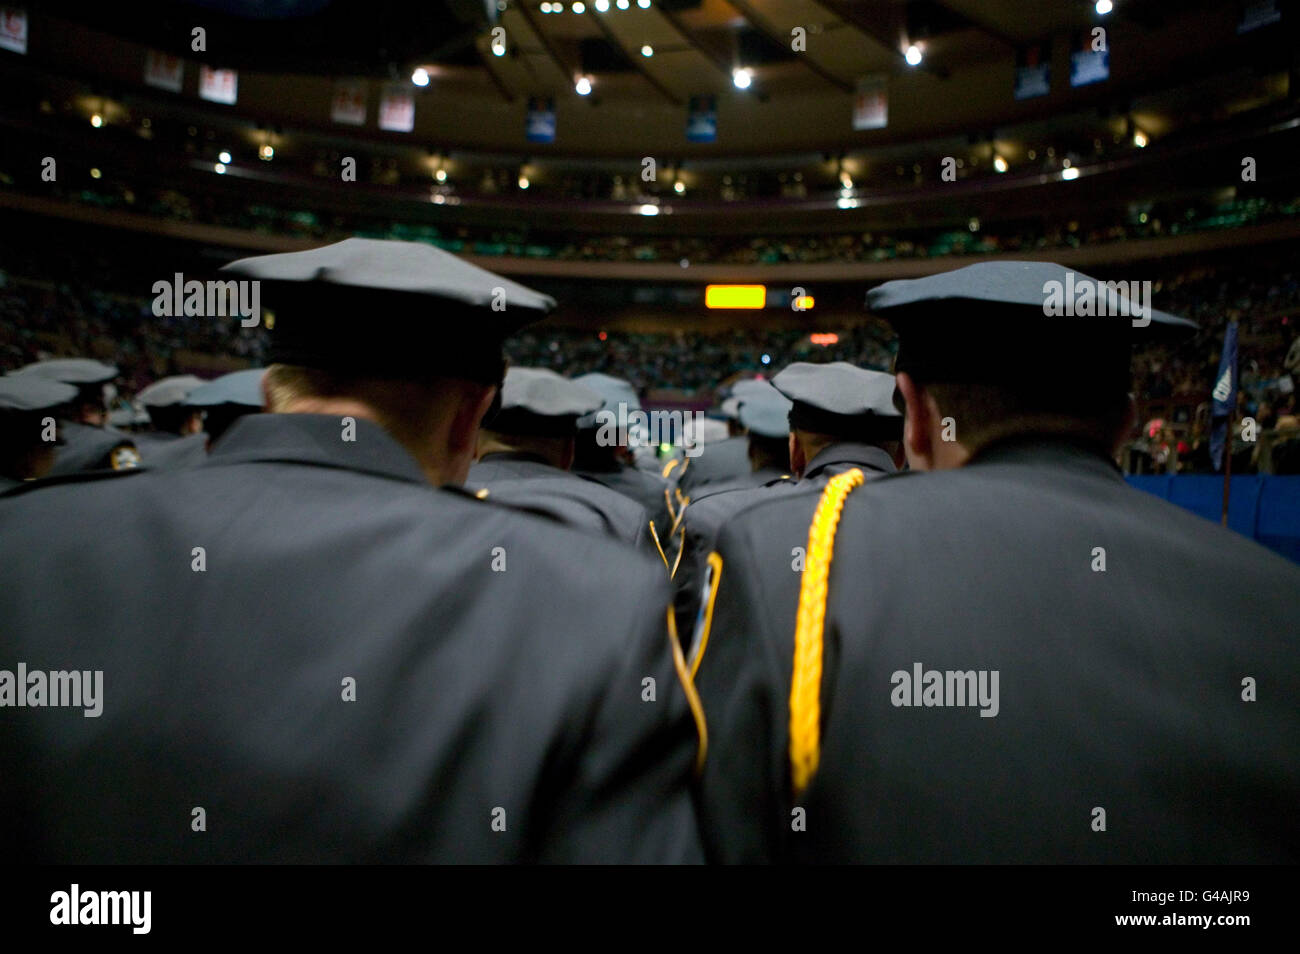 29 December 2005 - New York City, NY - Recruits belonging to the New York Police Department's Class of 2005 attend their graduat Stock Photo